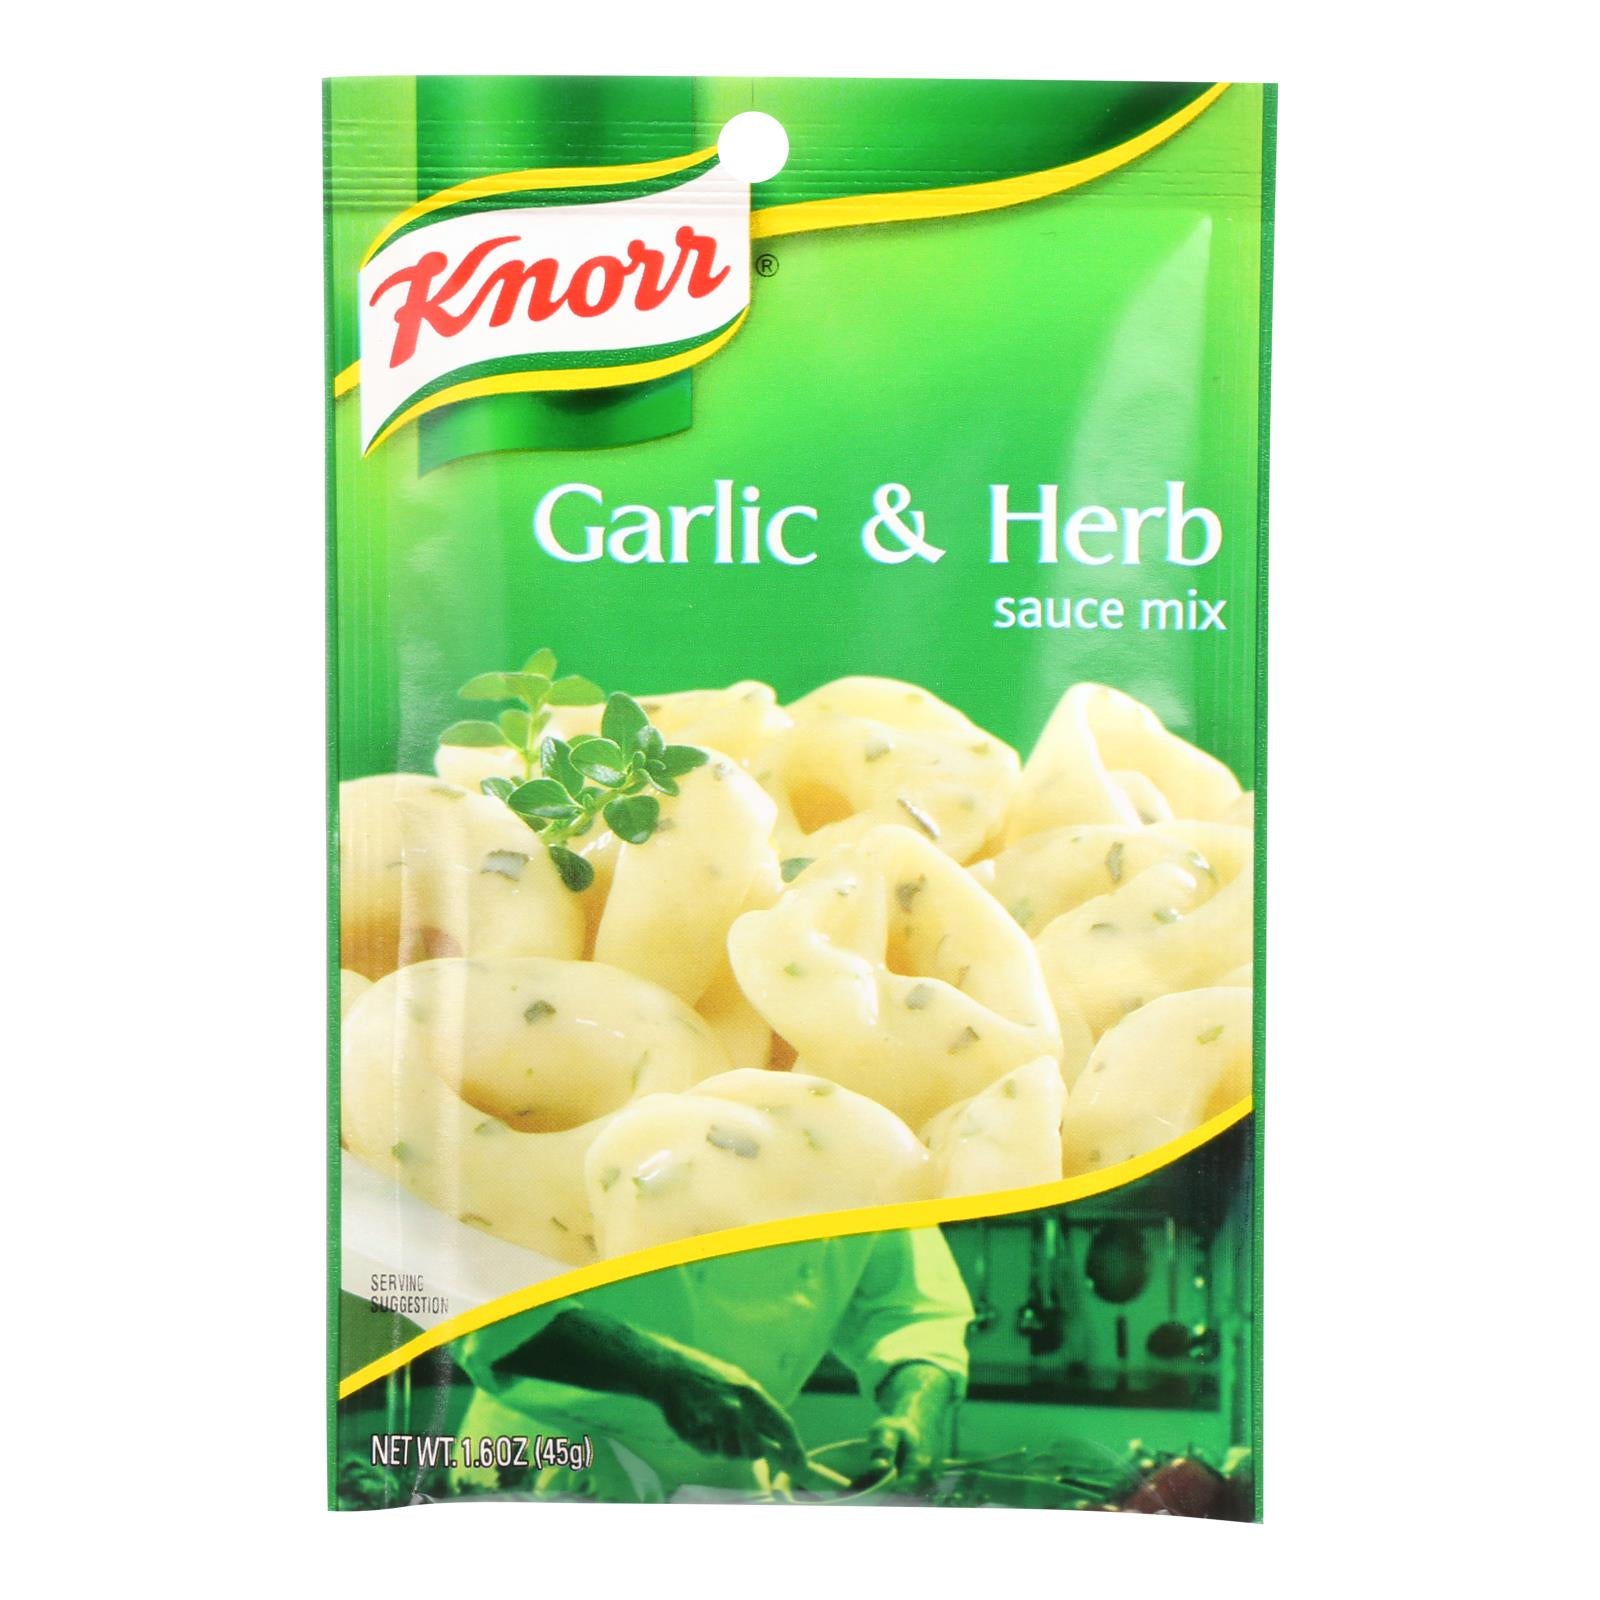 Knorr Sauce Mix - Garlic And Herb - 1.6 Oz - Case Of 12